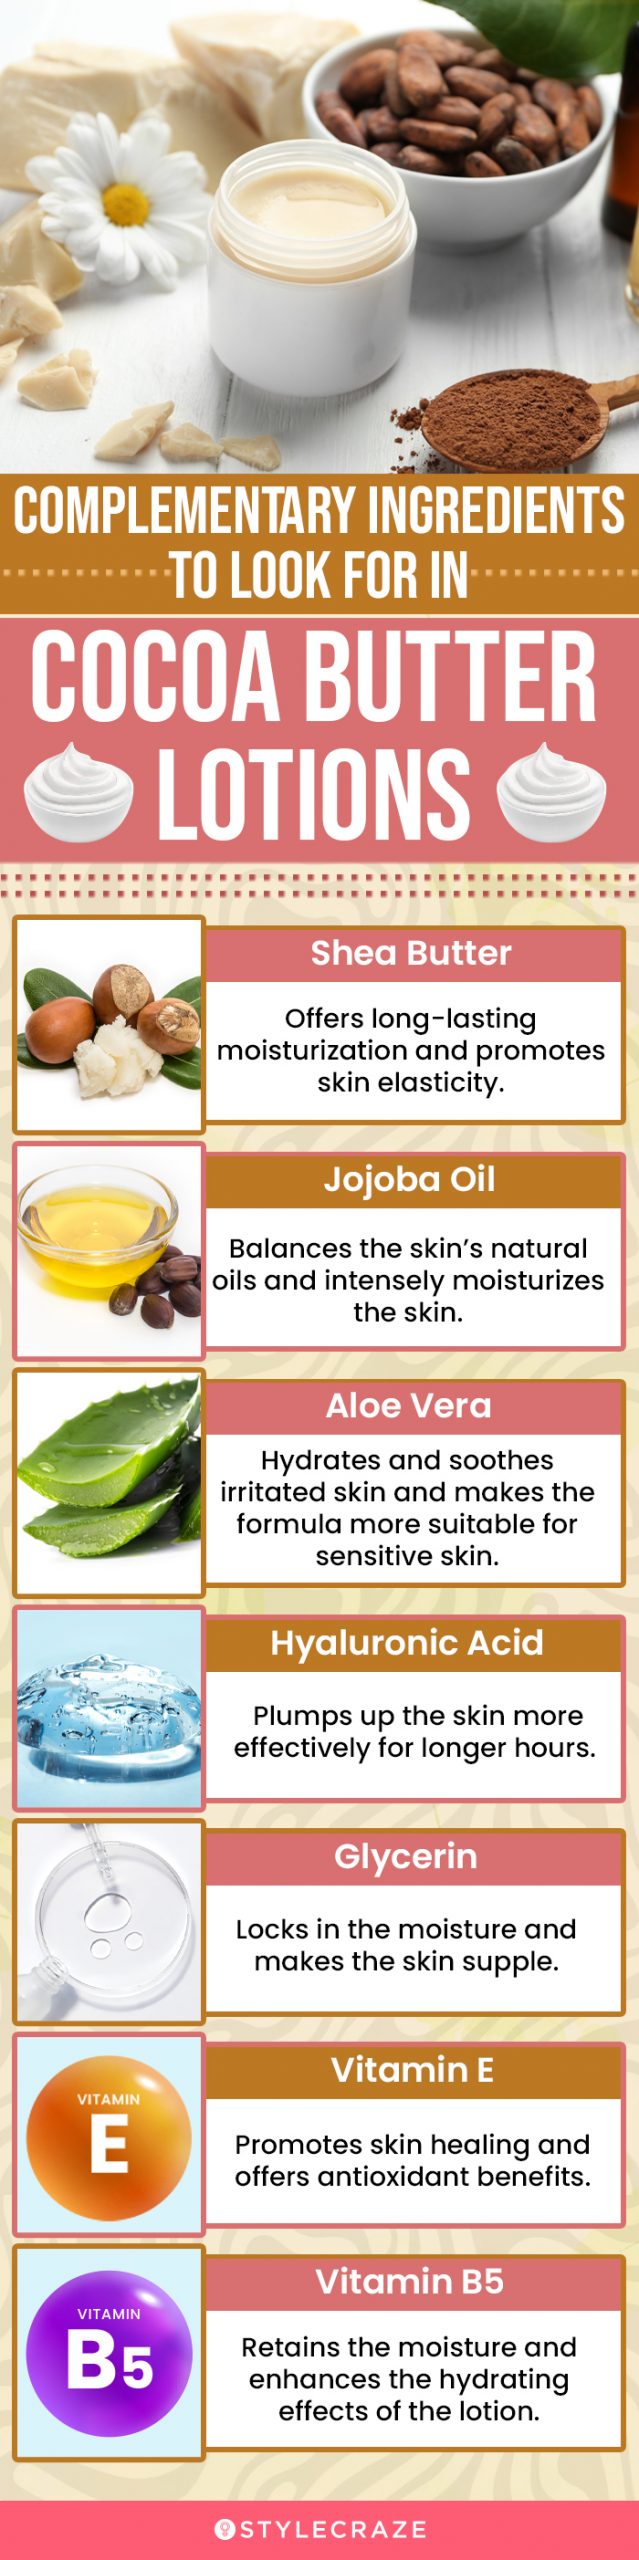 Complementary Ingredients To Look For In Cocoa Butter Lotions (infographic)